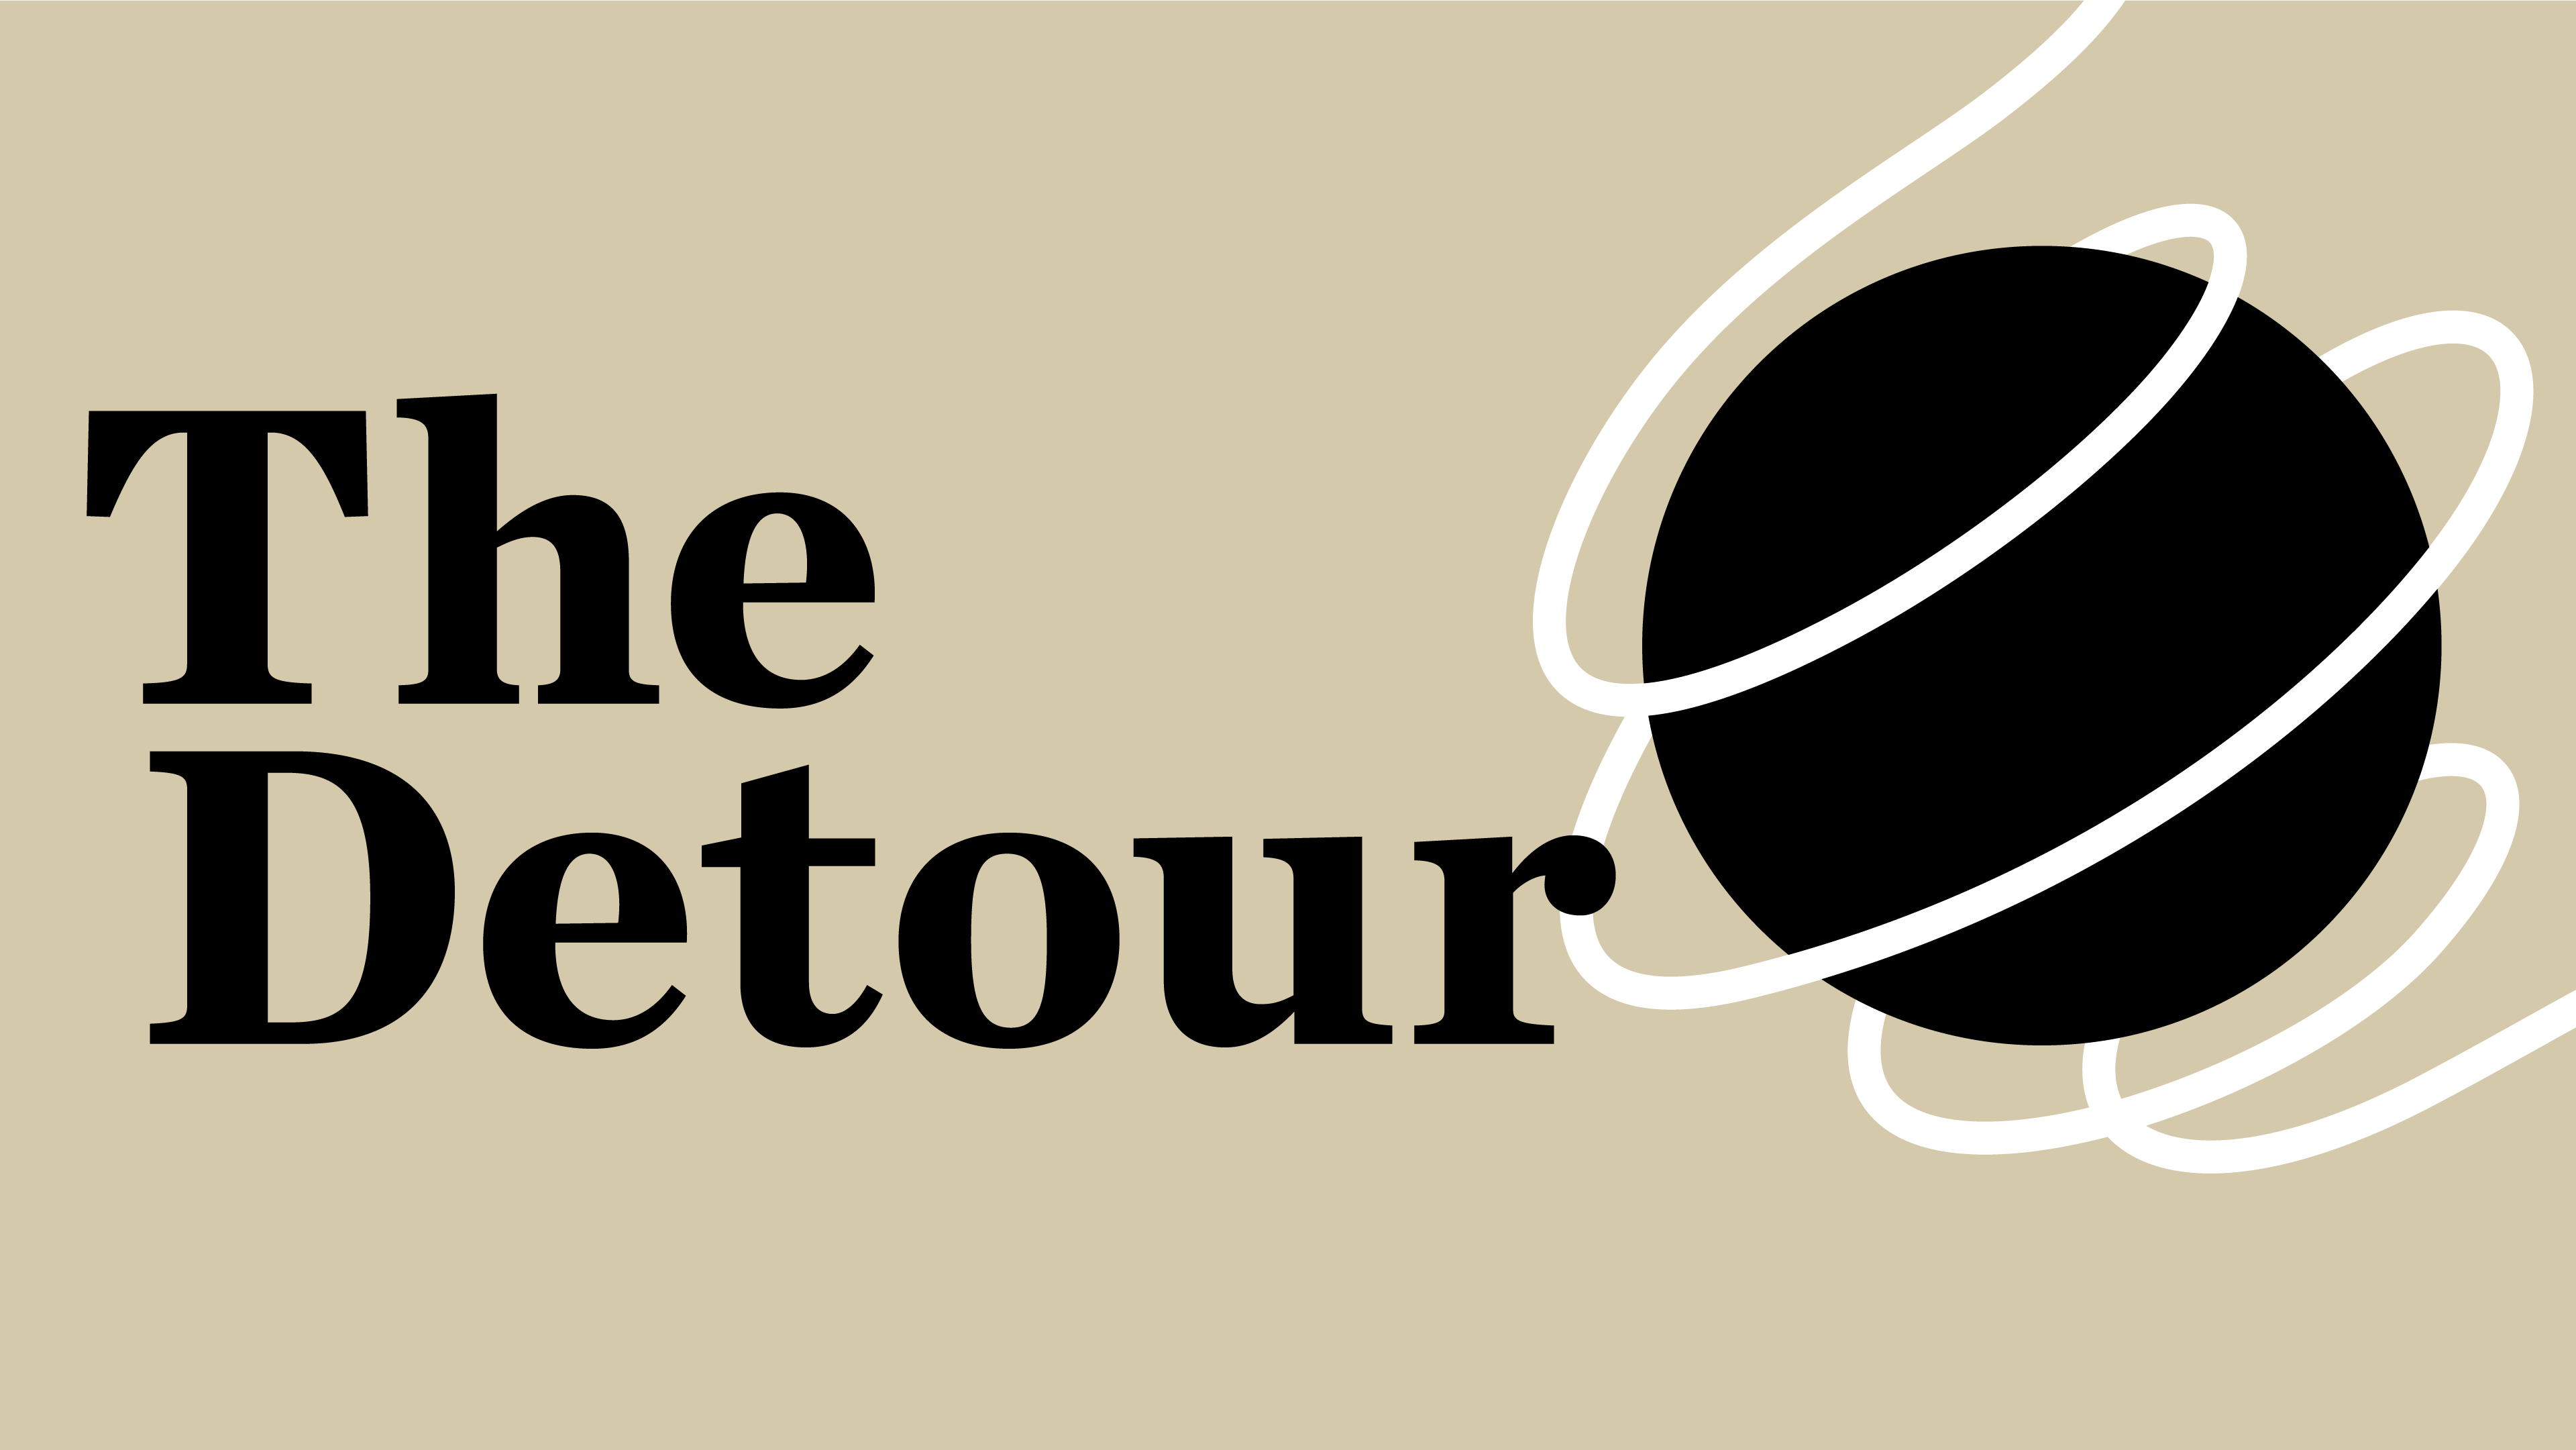 The cover art for The Detour podcast, depicting a white line orbiting a black sphere.